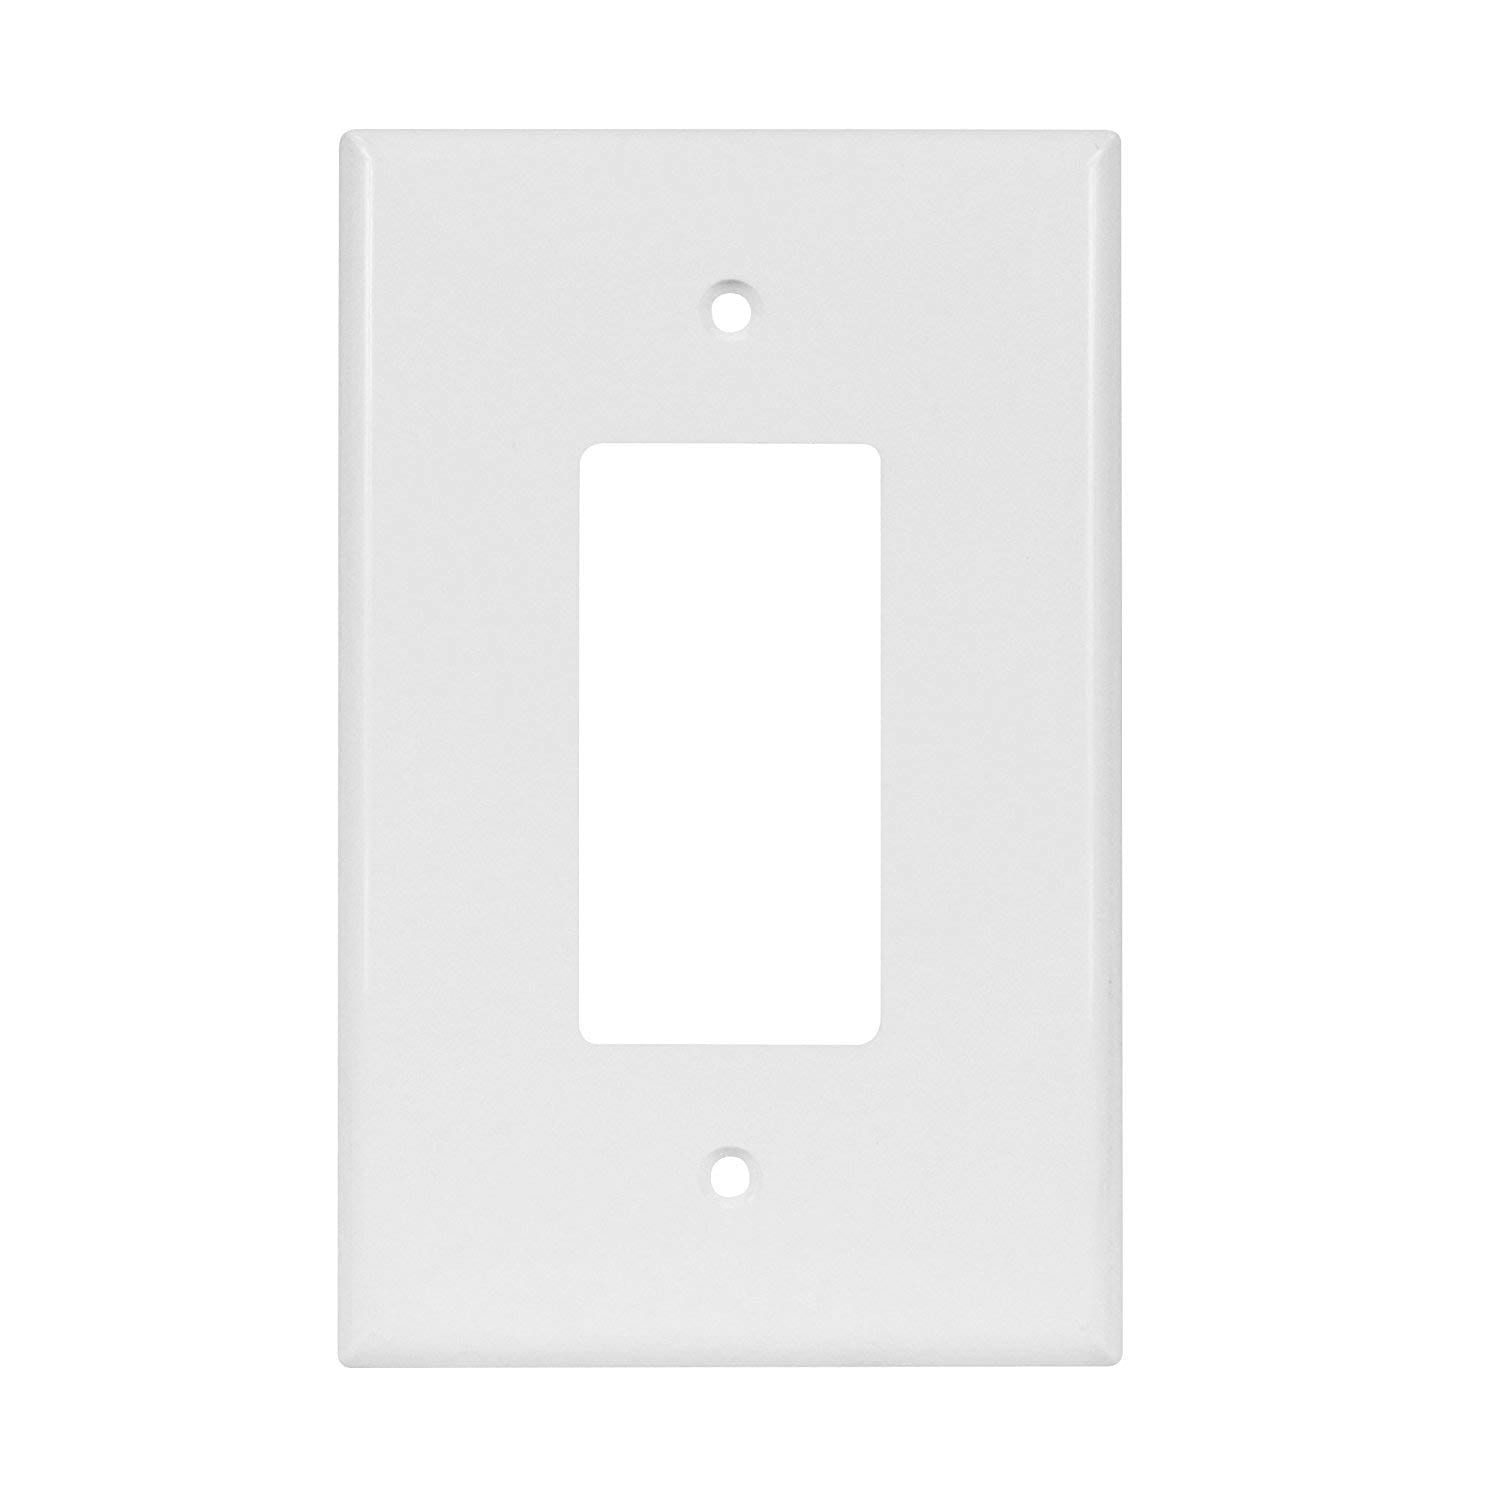 Double Decorator Switch Cover, Two Outlet Wall Plate White